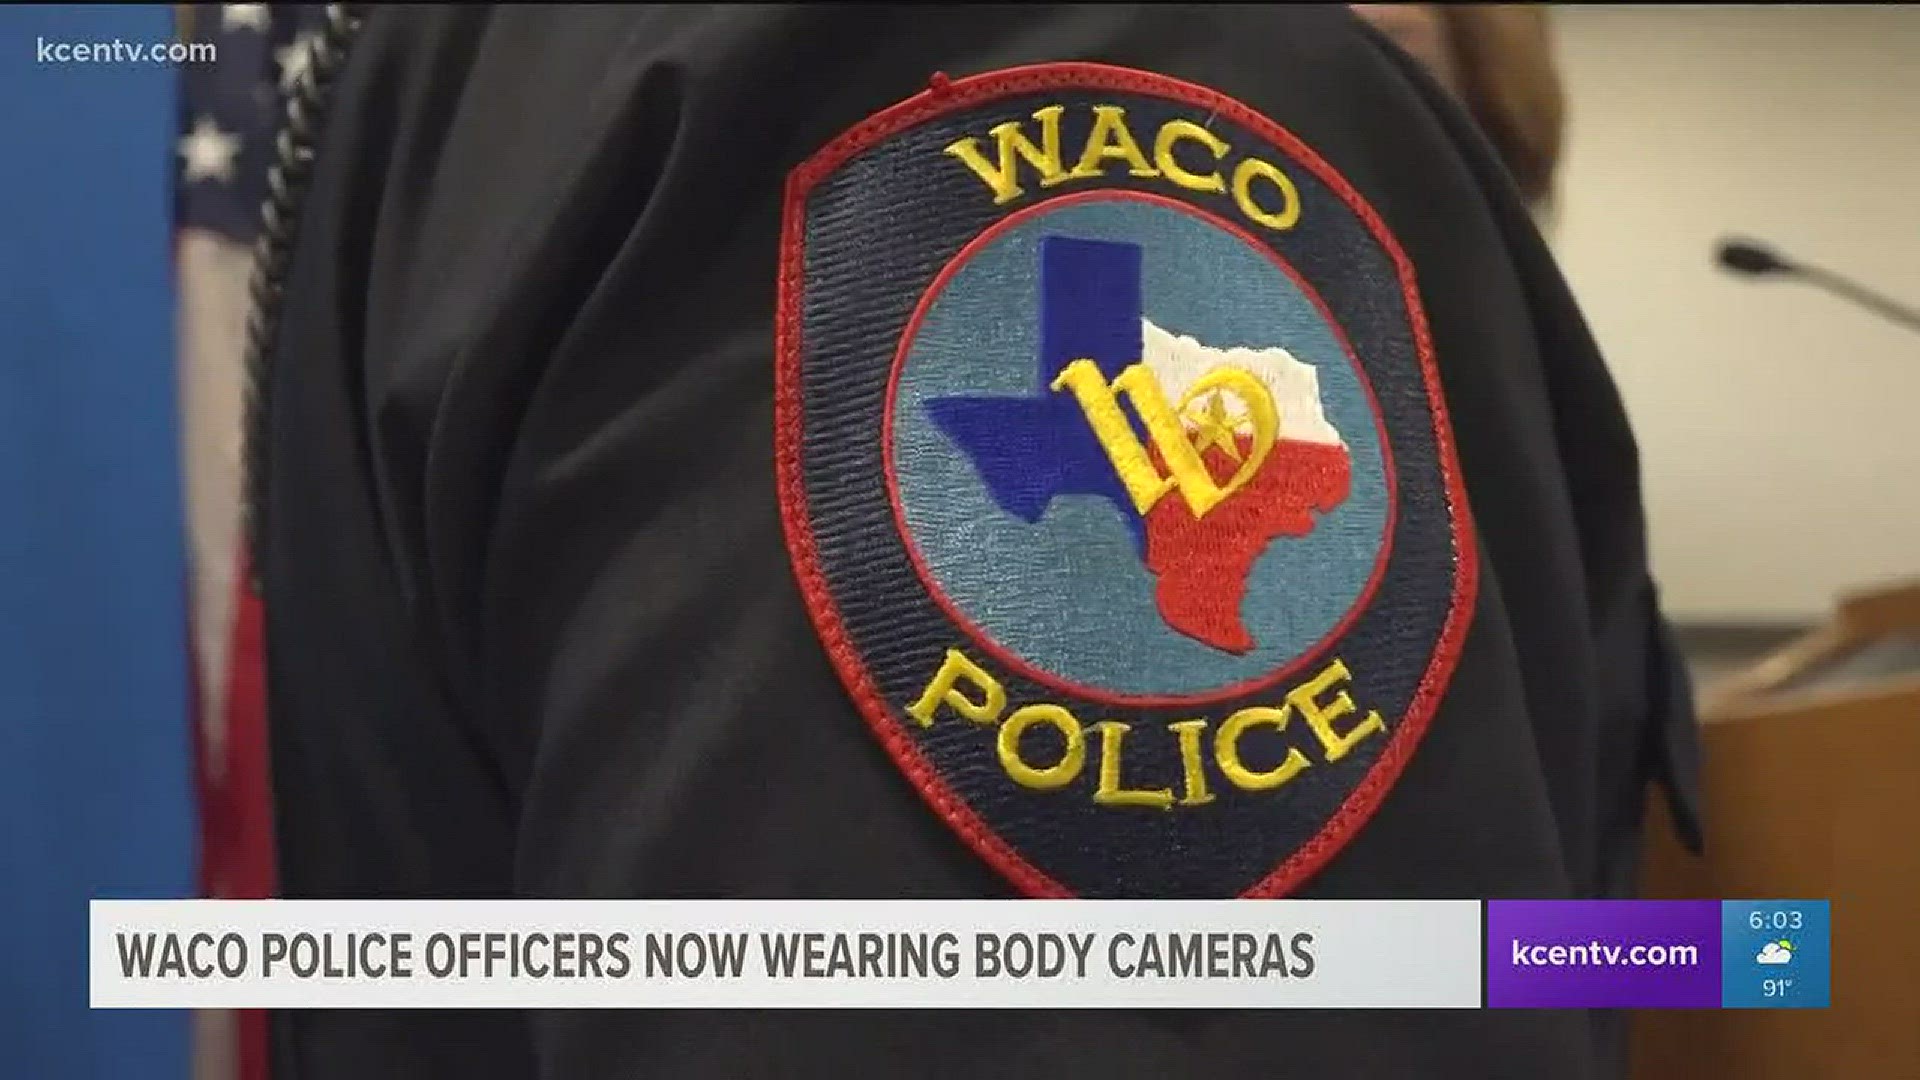 After a two year process, the Waco Police Department said it's now giving body cameras to all of their officers.